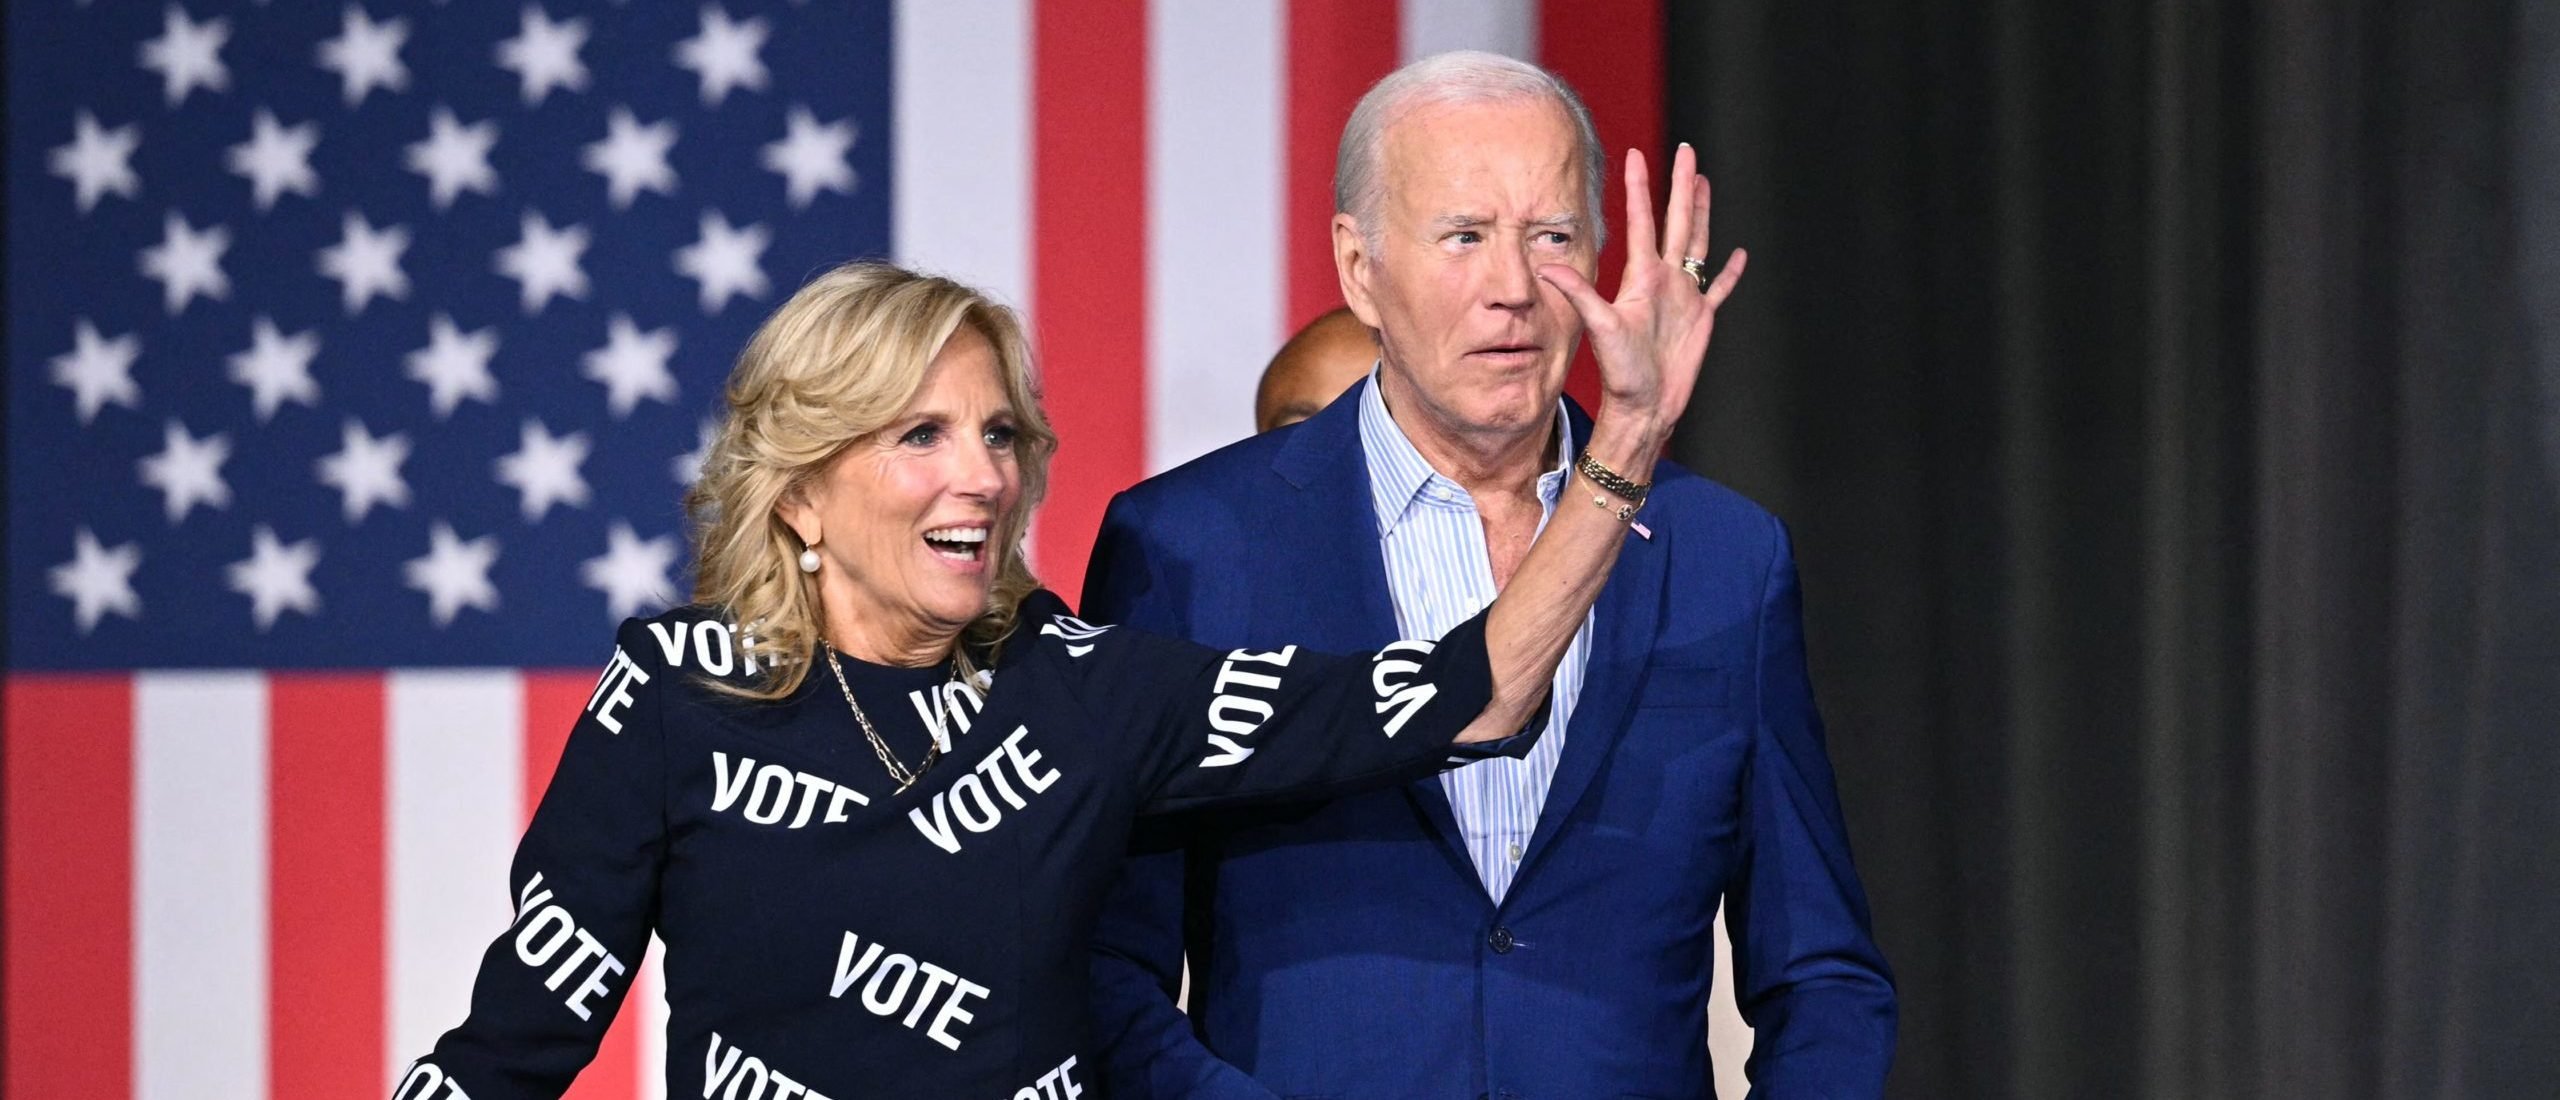 US President Joe Biden and First Lady Jill Biden arrive to speak at a campaign event in Raleigh, North Carolina, on June 28, 2024. (Photo by Mandel NGAN / AFP) (Photo by MANDEL NGAN/AFP via Getty Images)